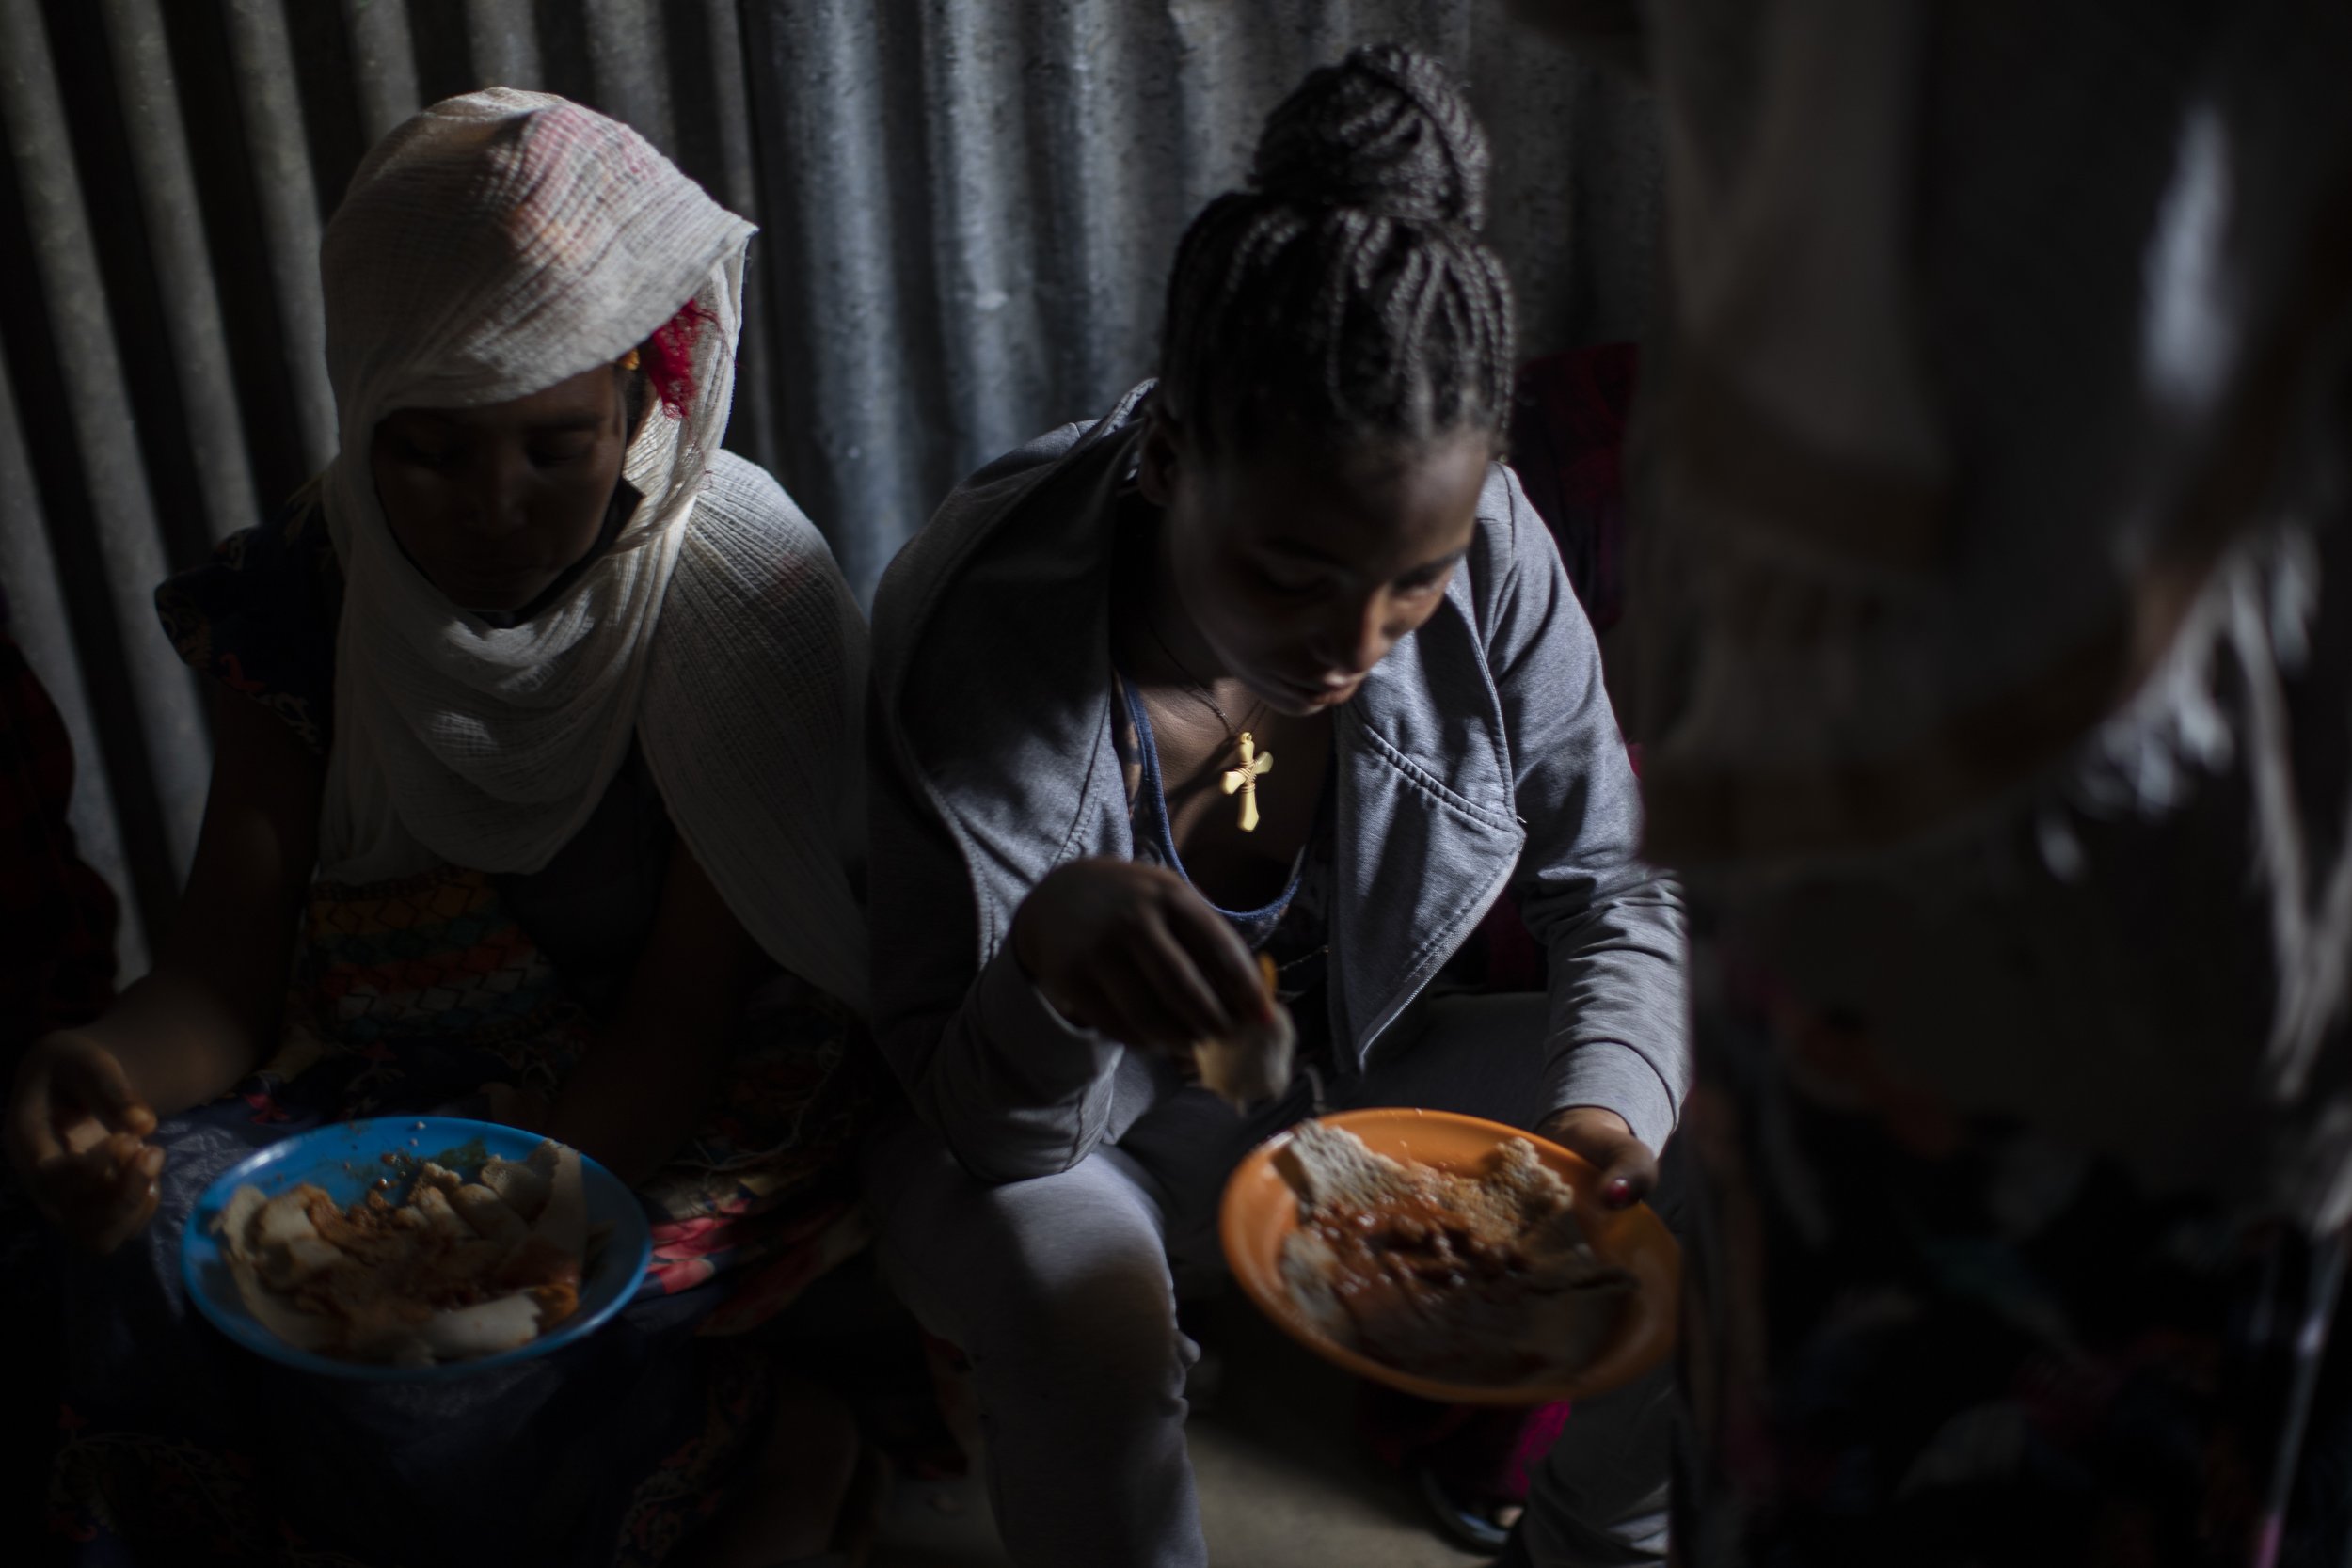  Displaced Tigrayan women, one wearing an Ethiopian Orthodox Christian cross, sit in a metal shack to eat food donated by local residents at a reception center for the internally displaced in Mekele, in the Tigray region of northern Ethiopia, on May 